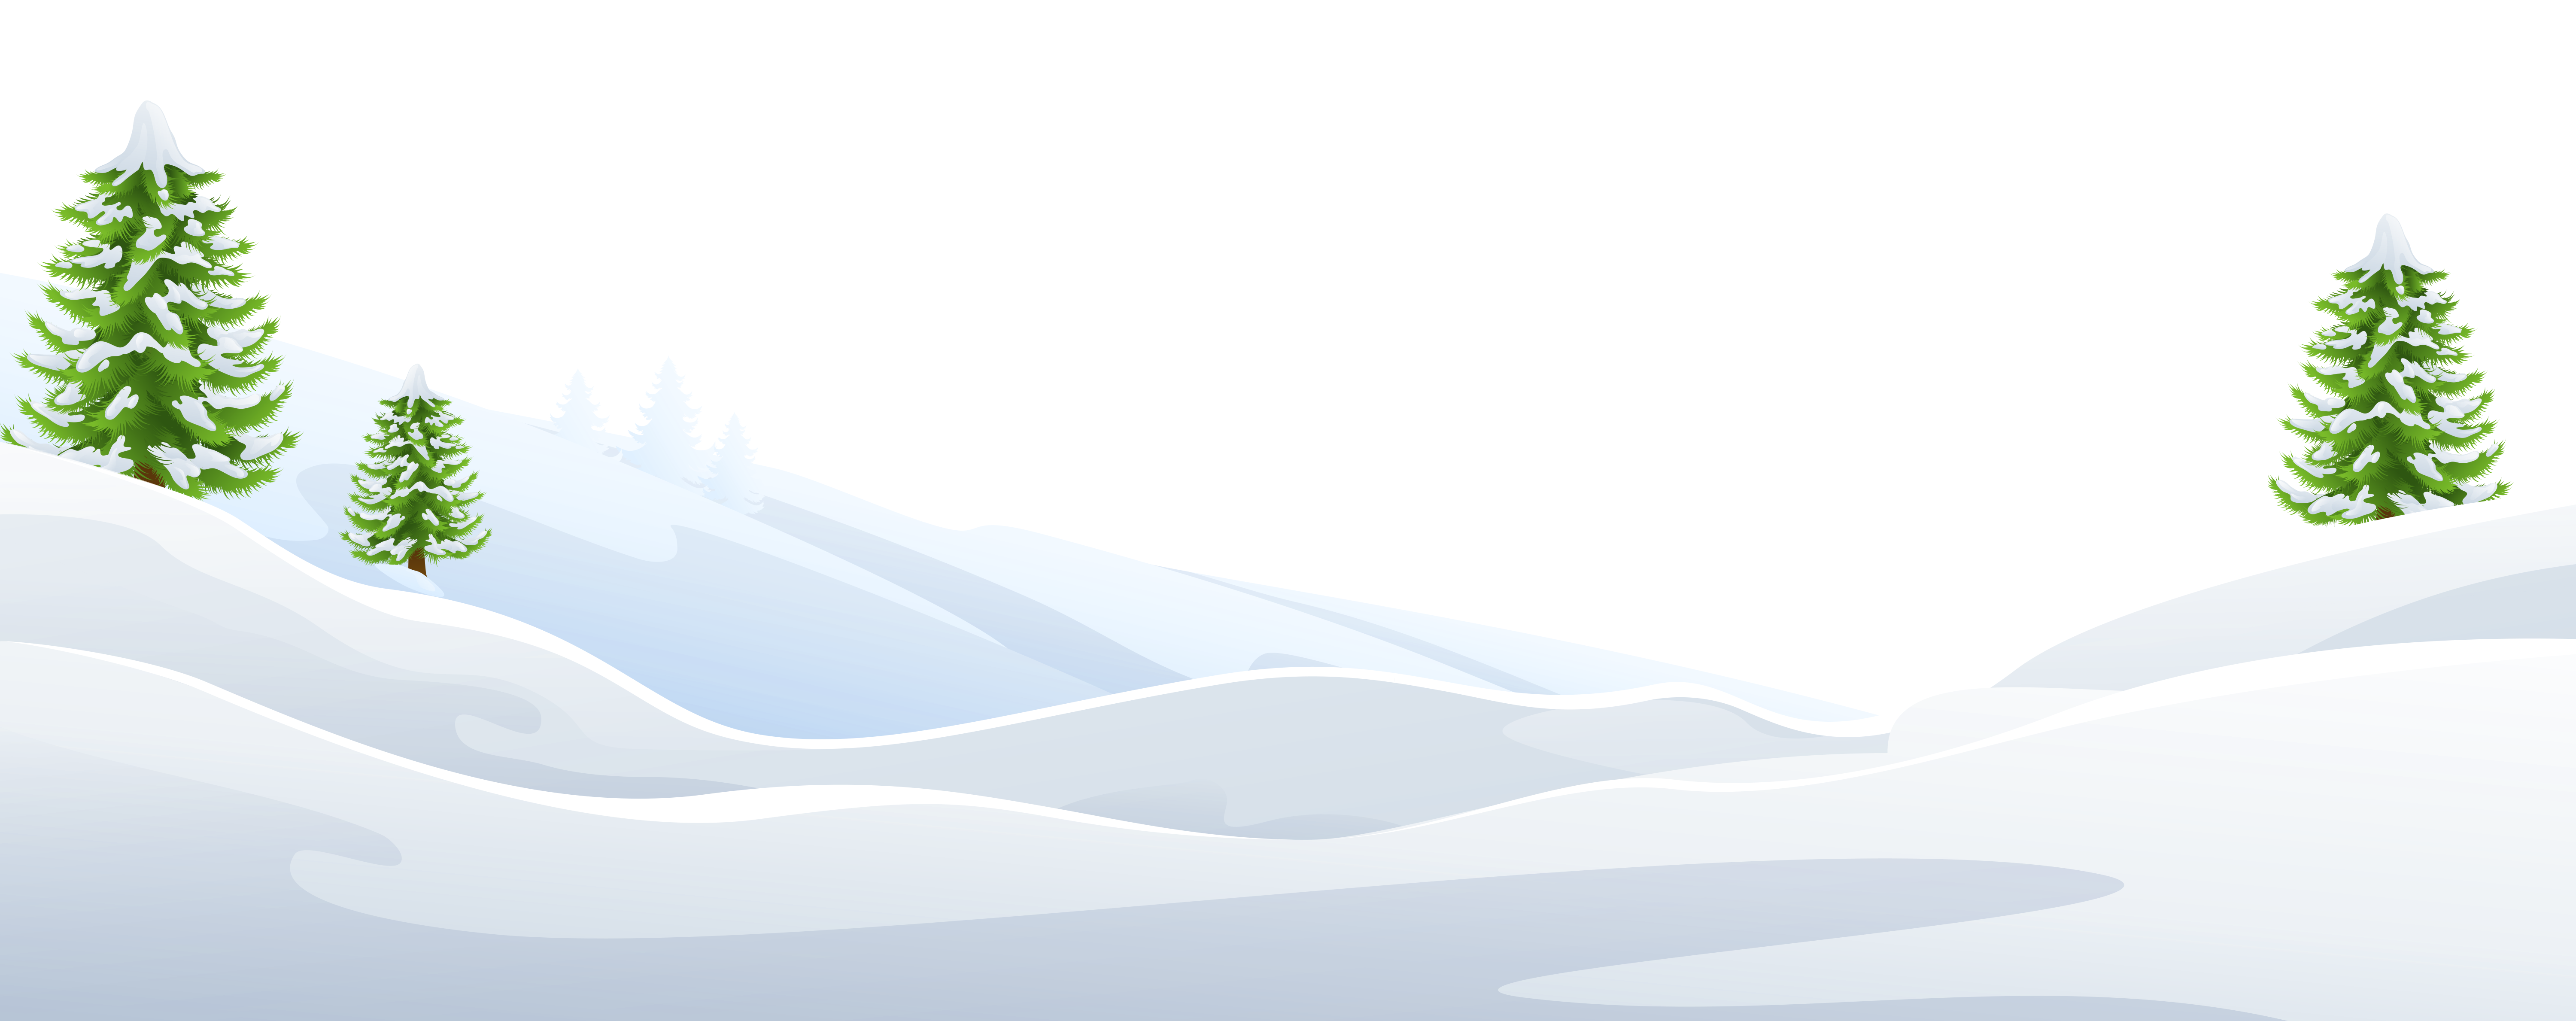 Clipart snow backdrop. Snowy ground with trees